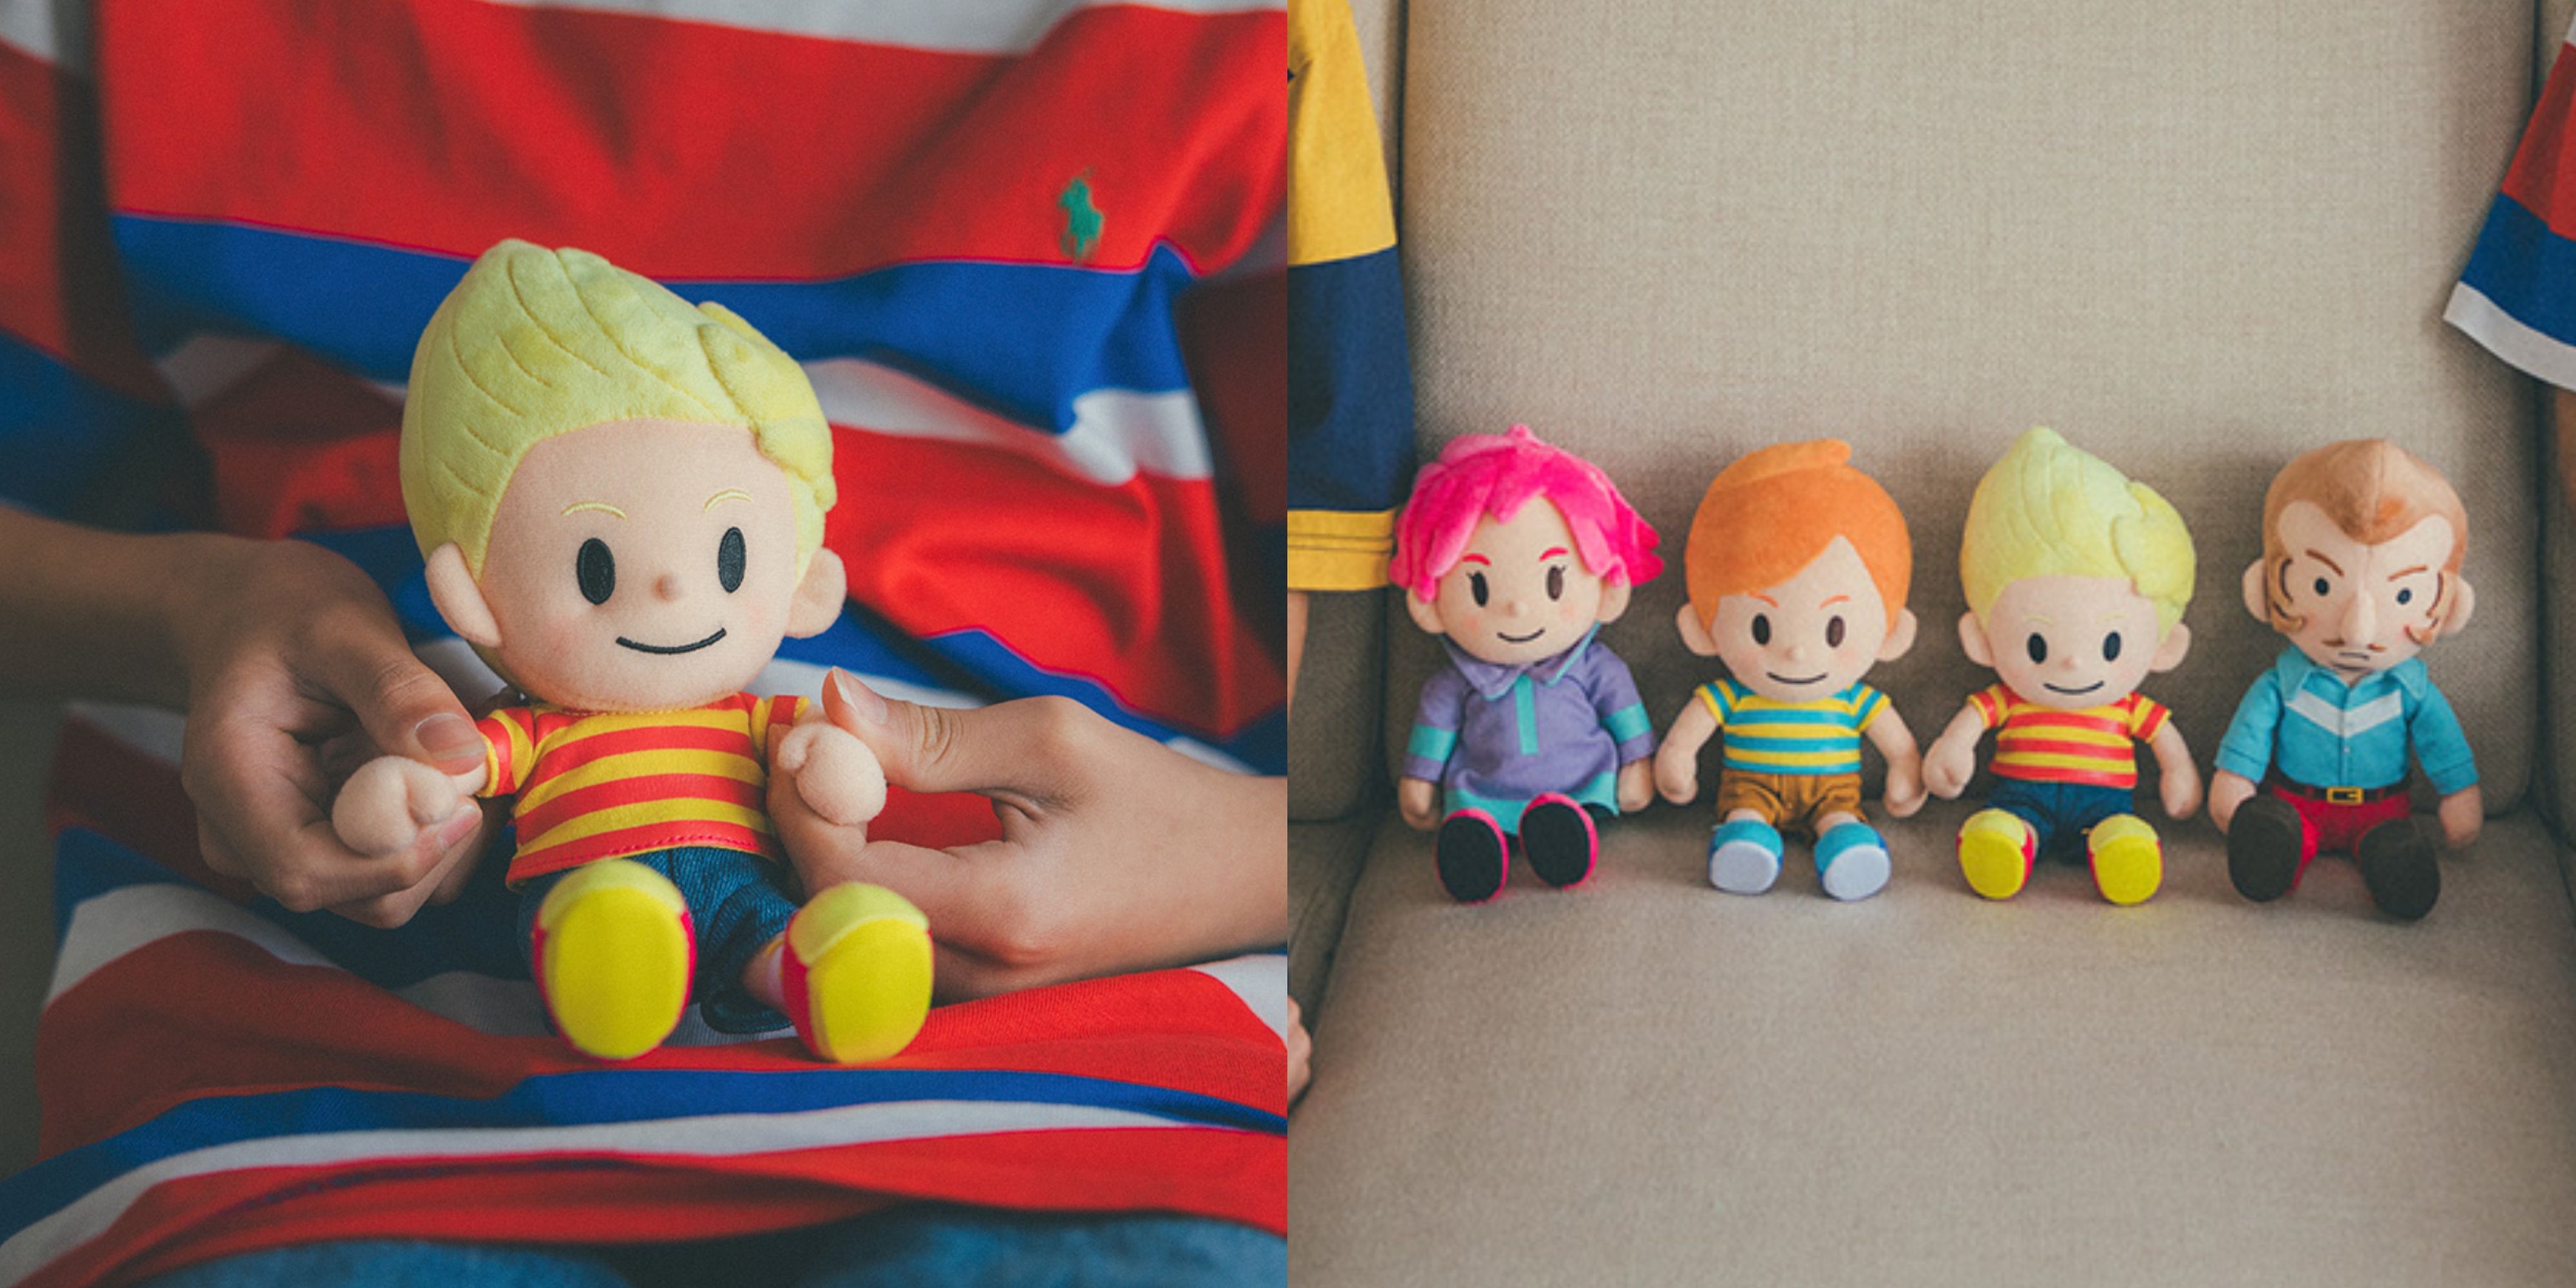 lucas plush, and the mother 3 plush set